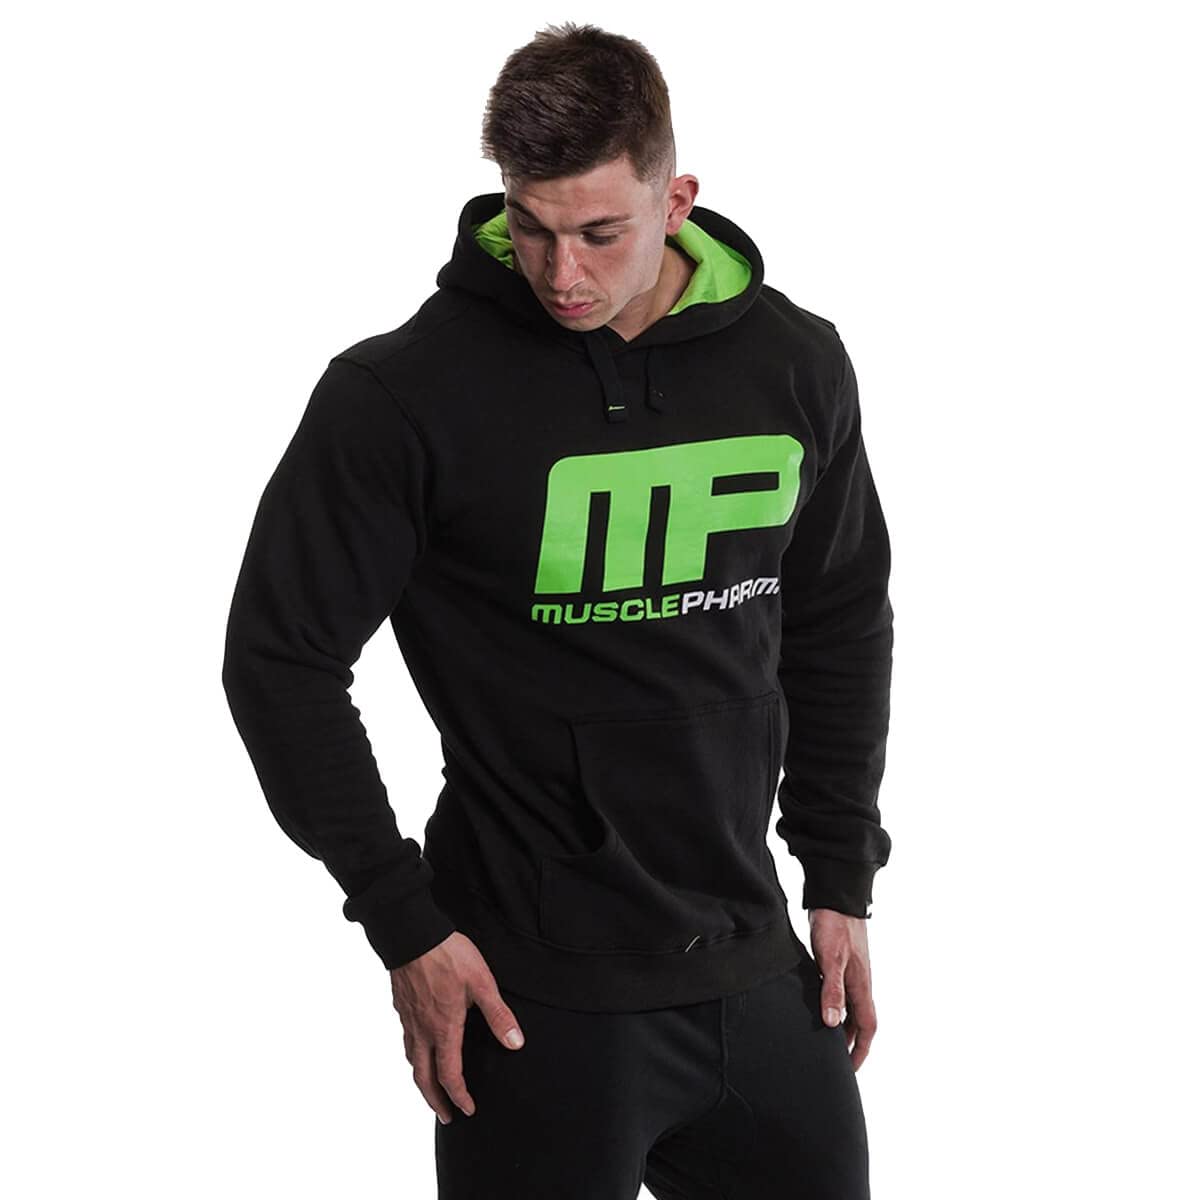 Muscle Pharm Herren Textilbekleidung Pullover Hoody, Green, M, MPSWT448